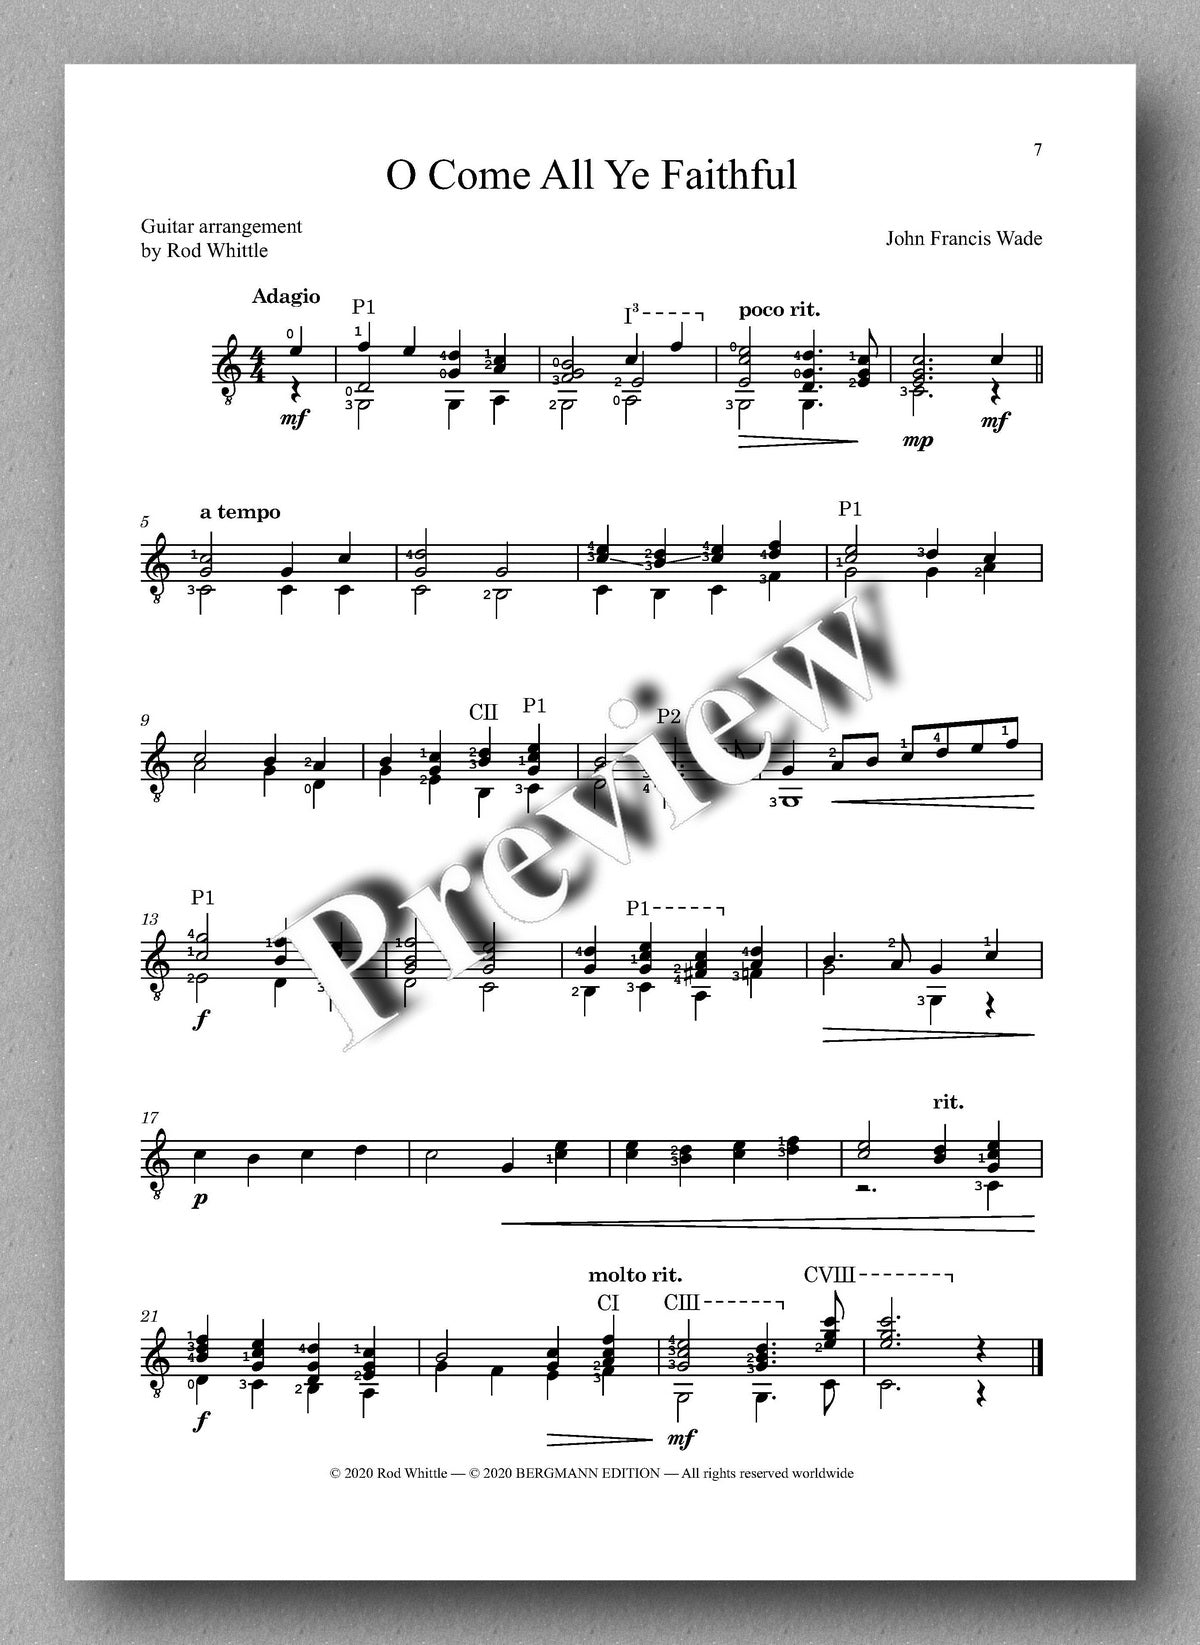 Whittlw, Christmas Carols - preview of the music score 2